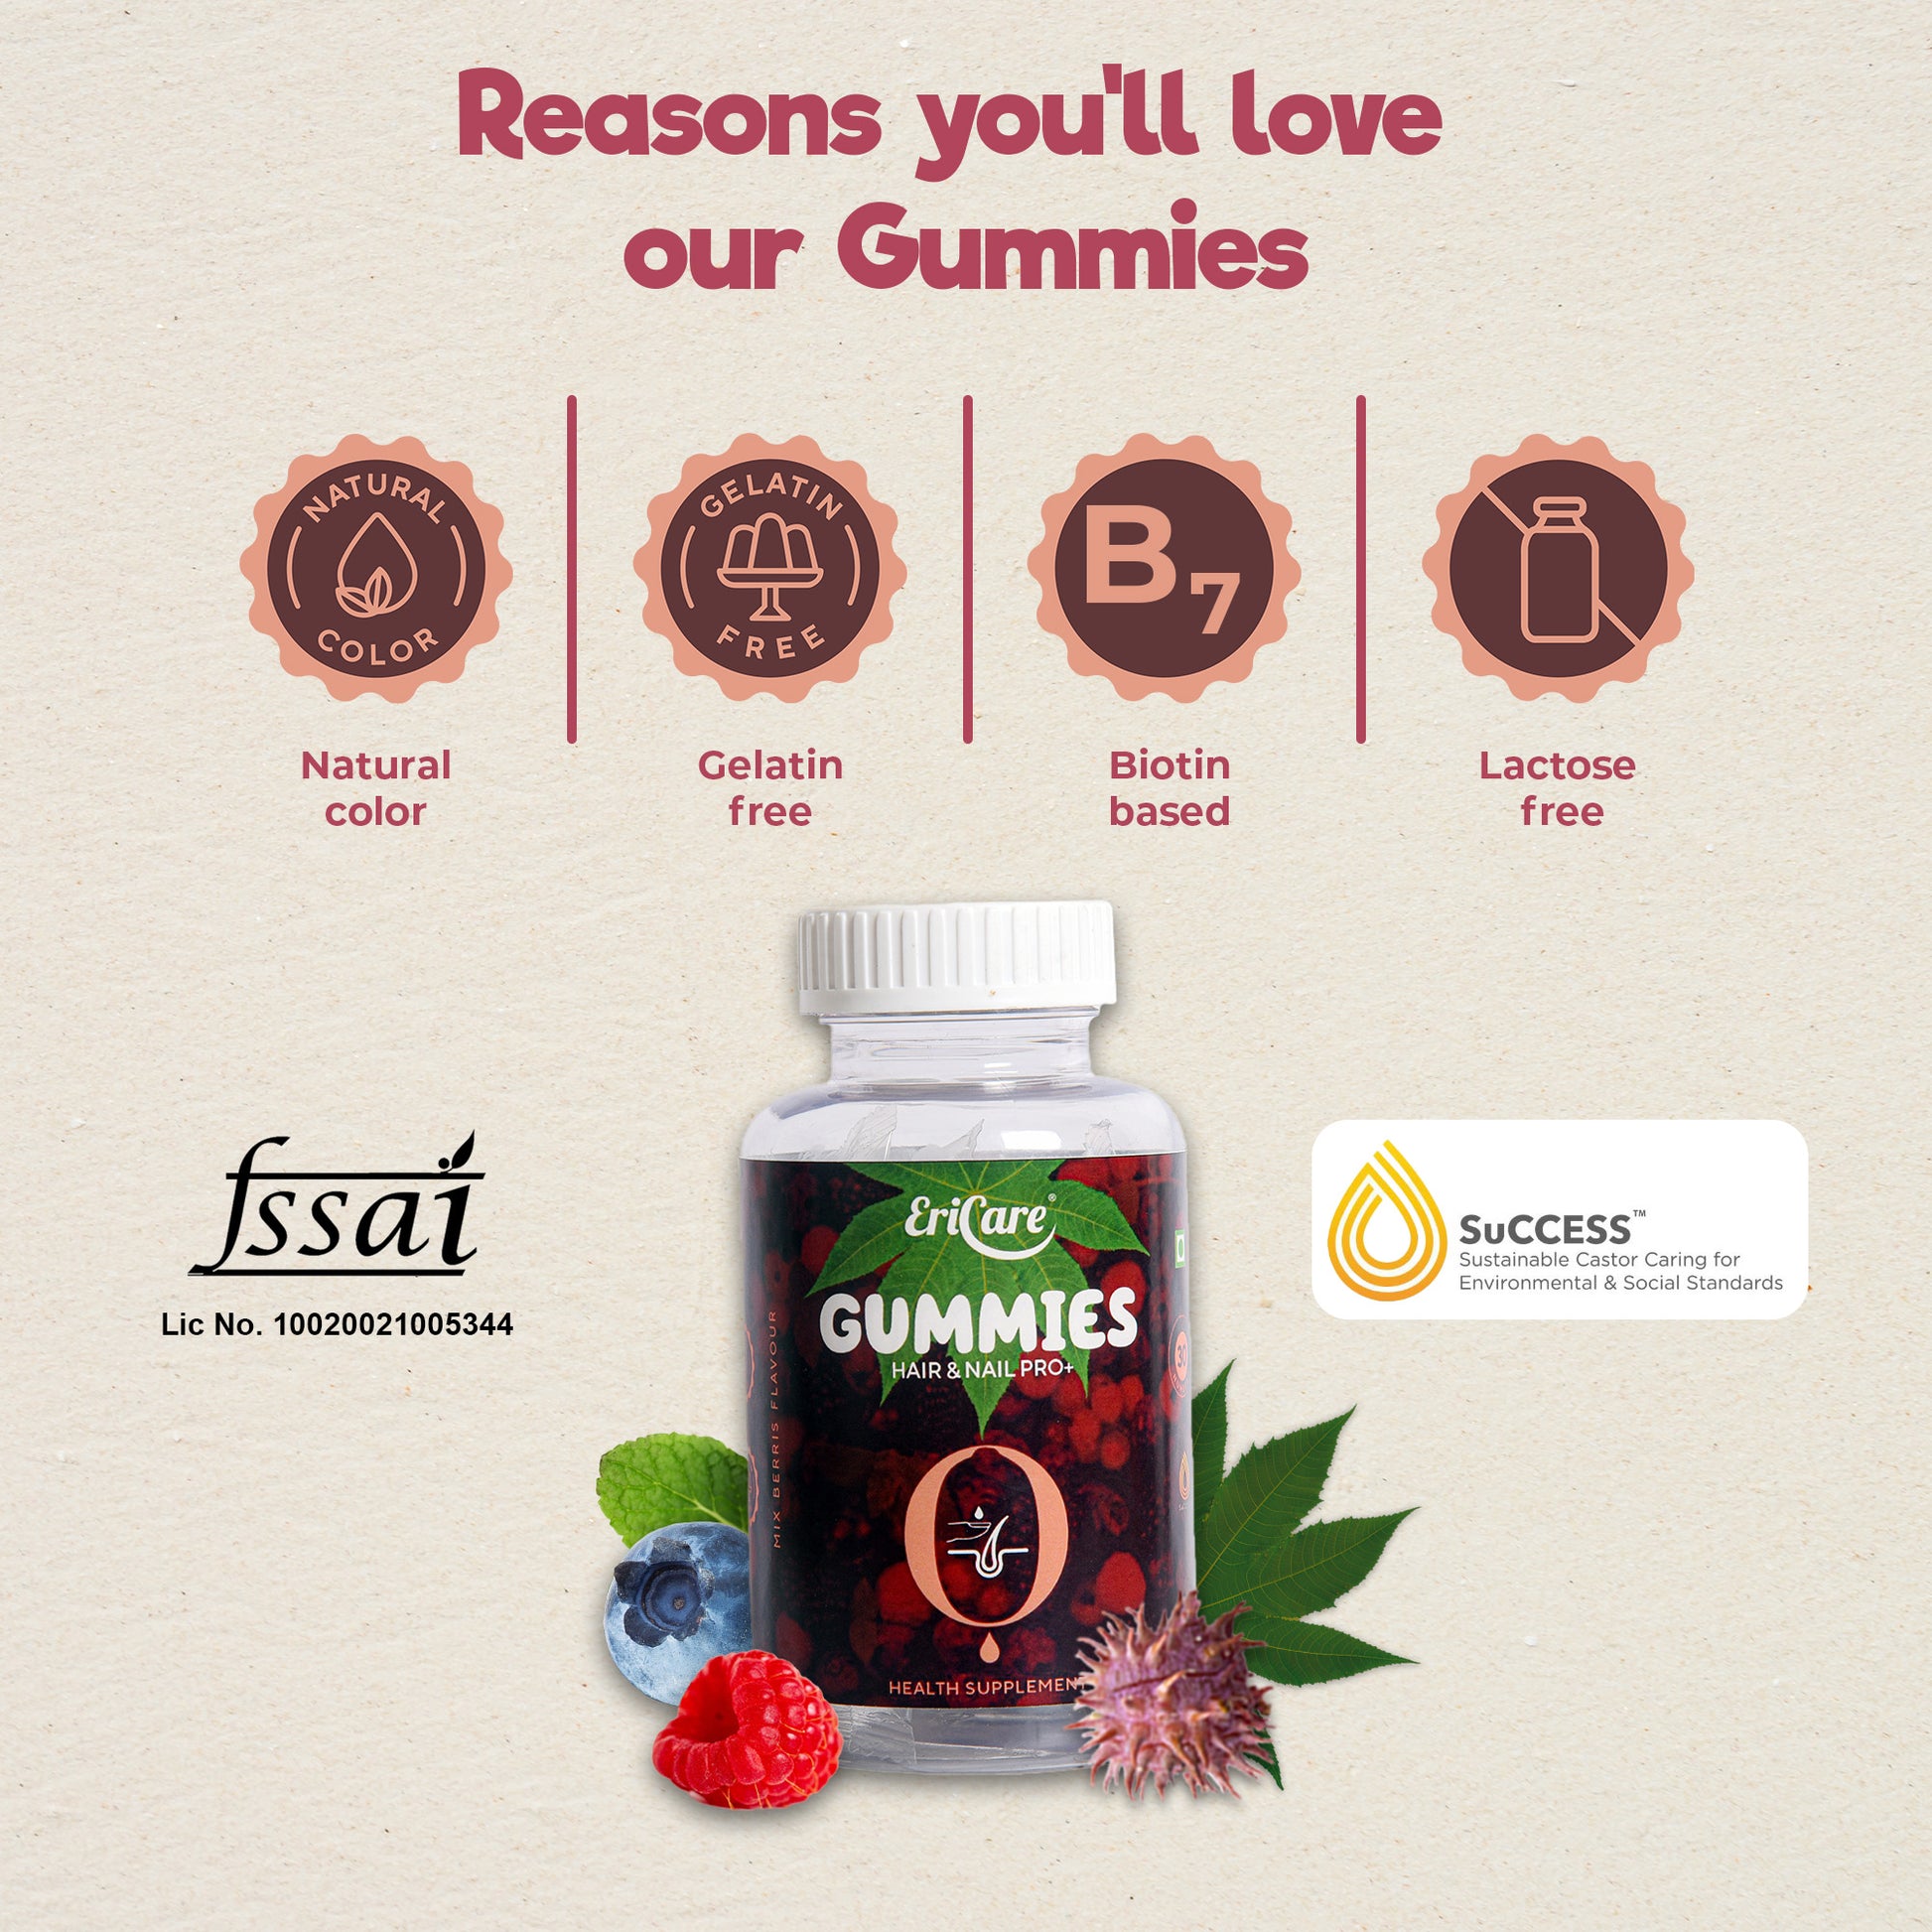 Our Gummies are unique and you will love it for its natural colour, biotin, gelatin free and lactose free